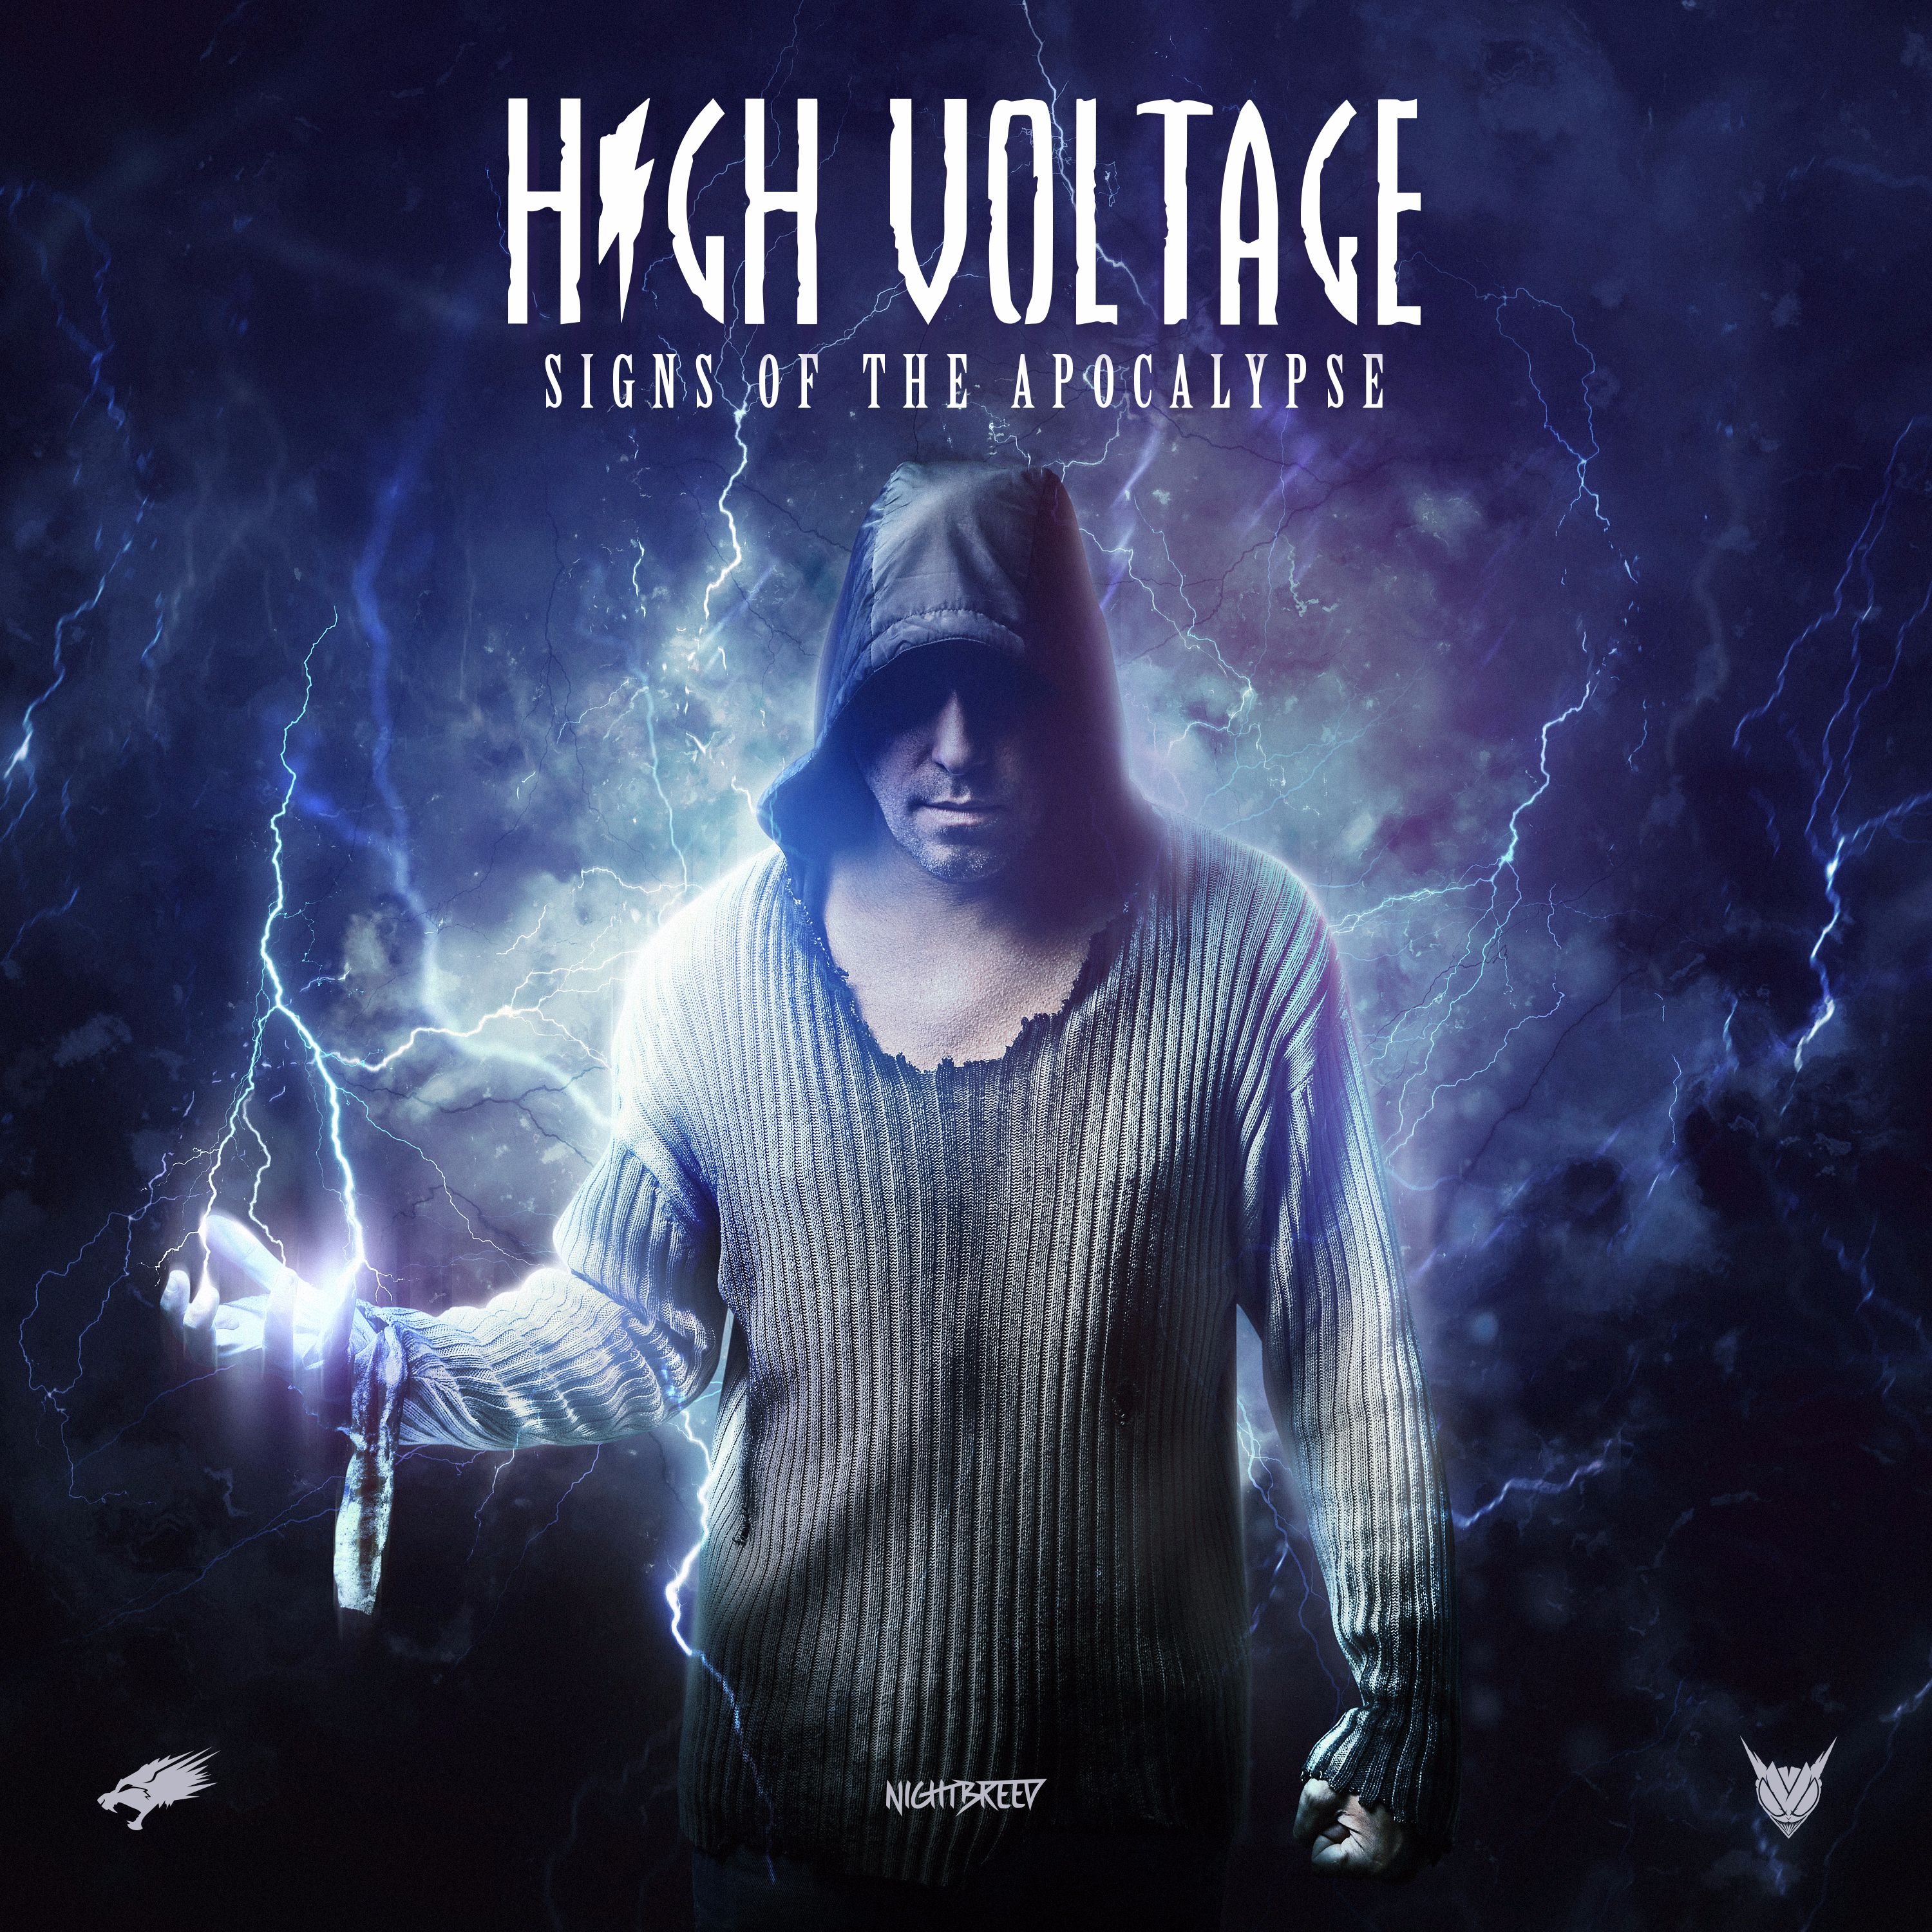 High Voltage - Signs Of The Apocalypse